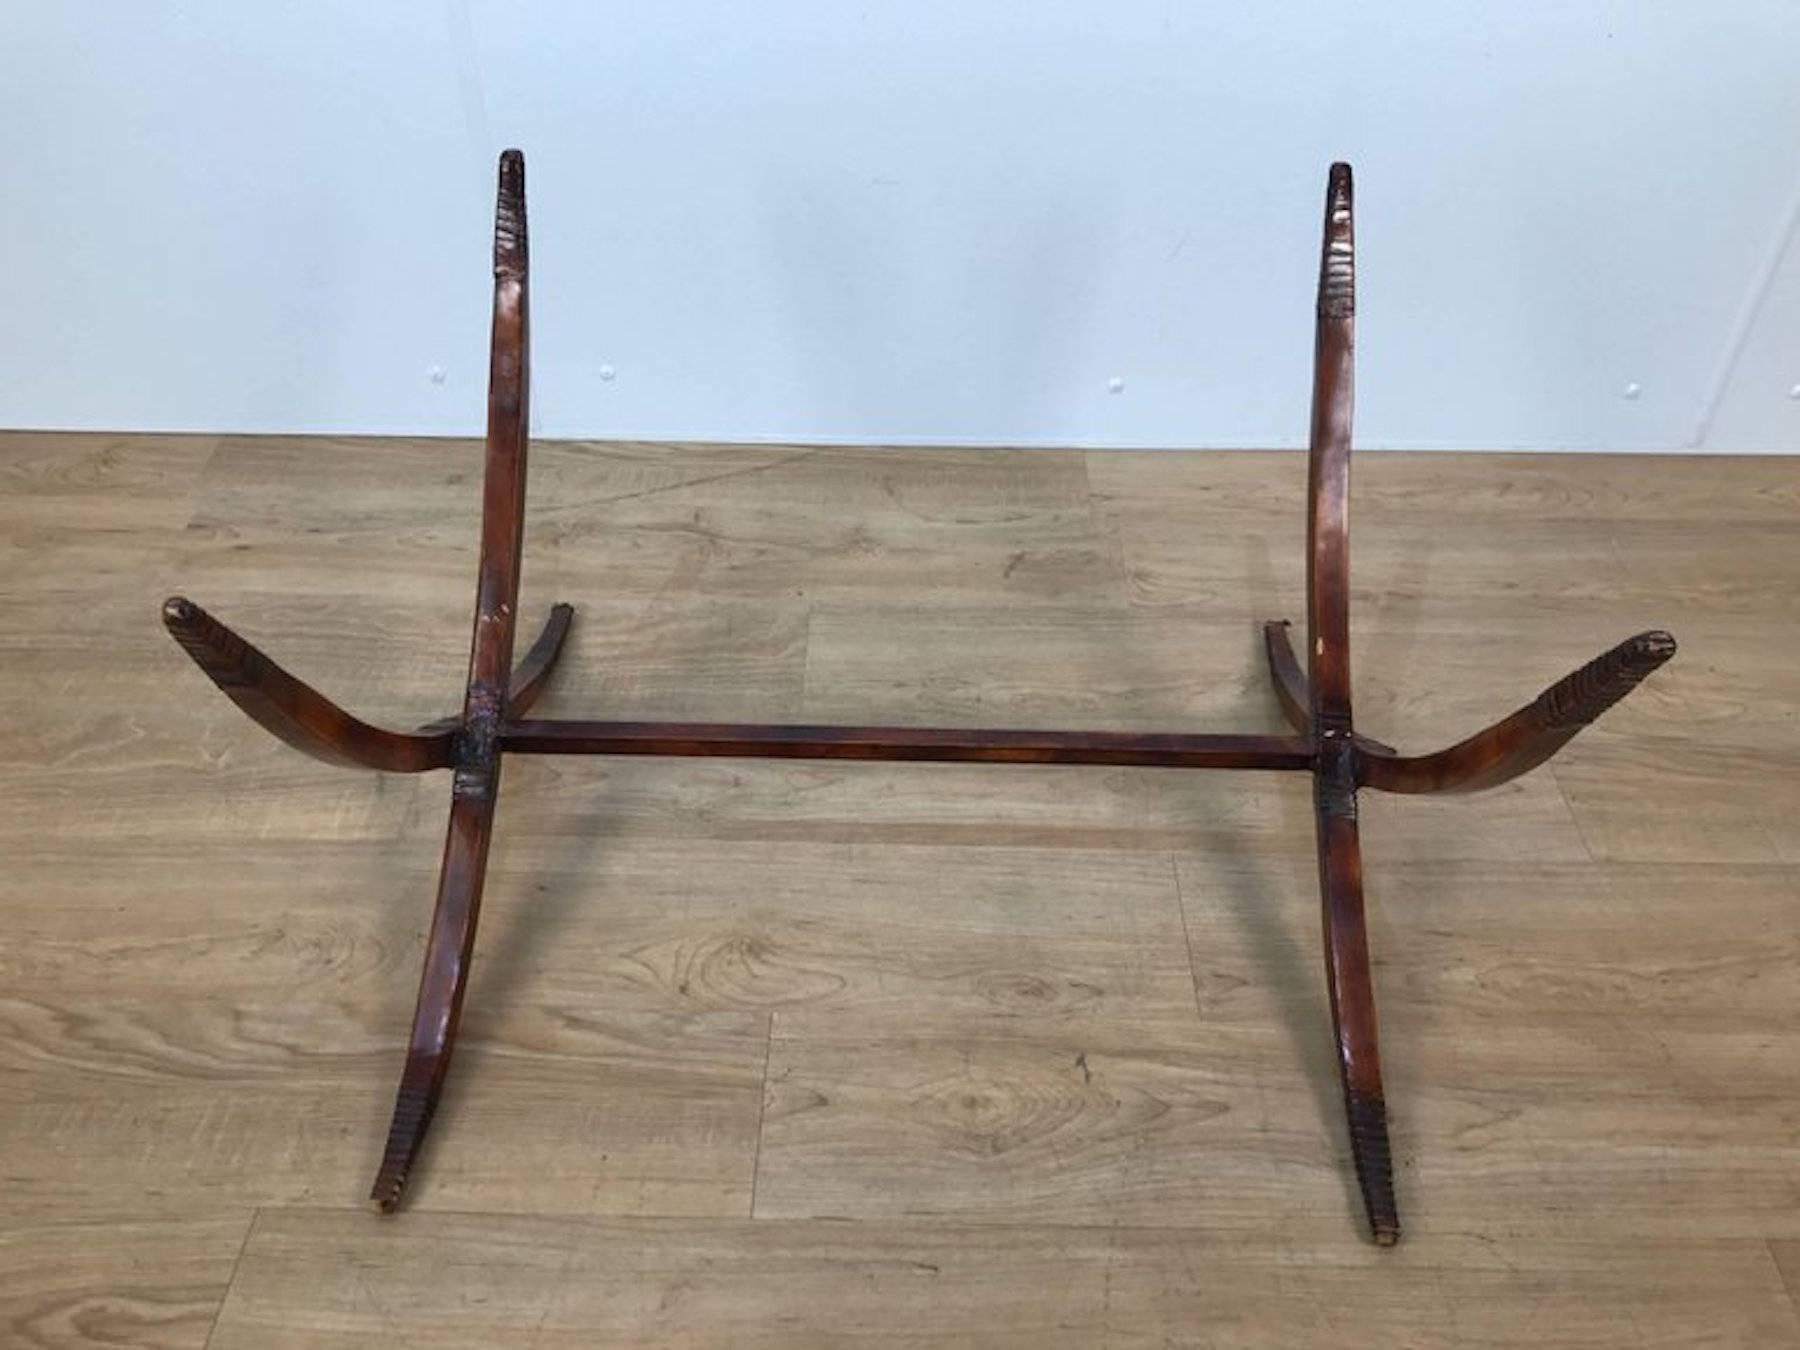 Carved Folk Art Style Canoe Wood and Iron Sculpture as a Coffee Table